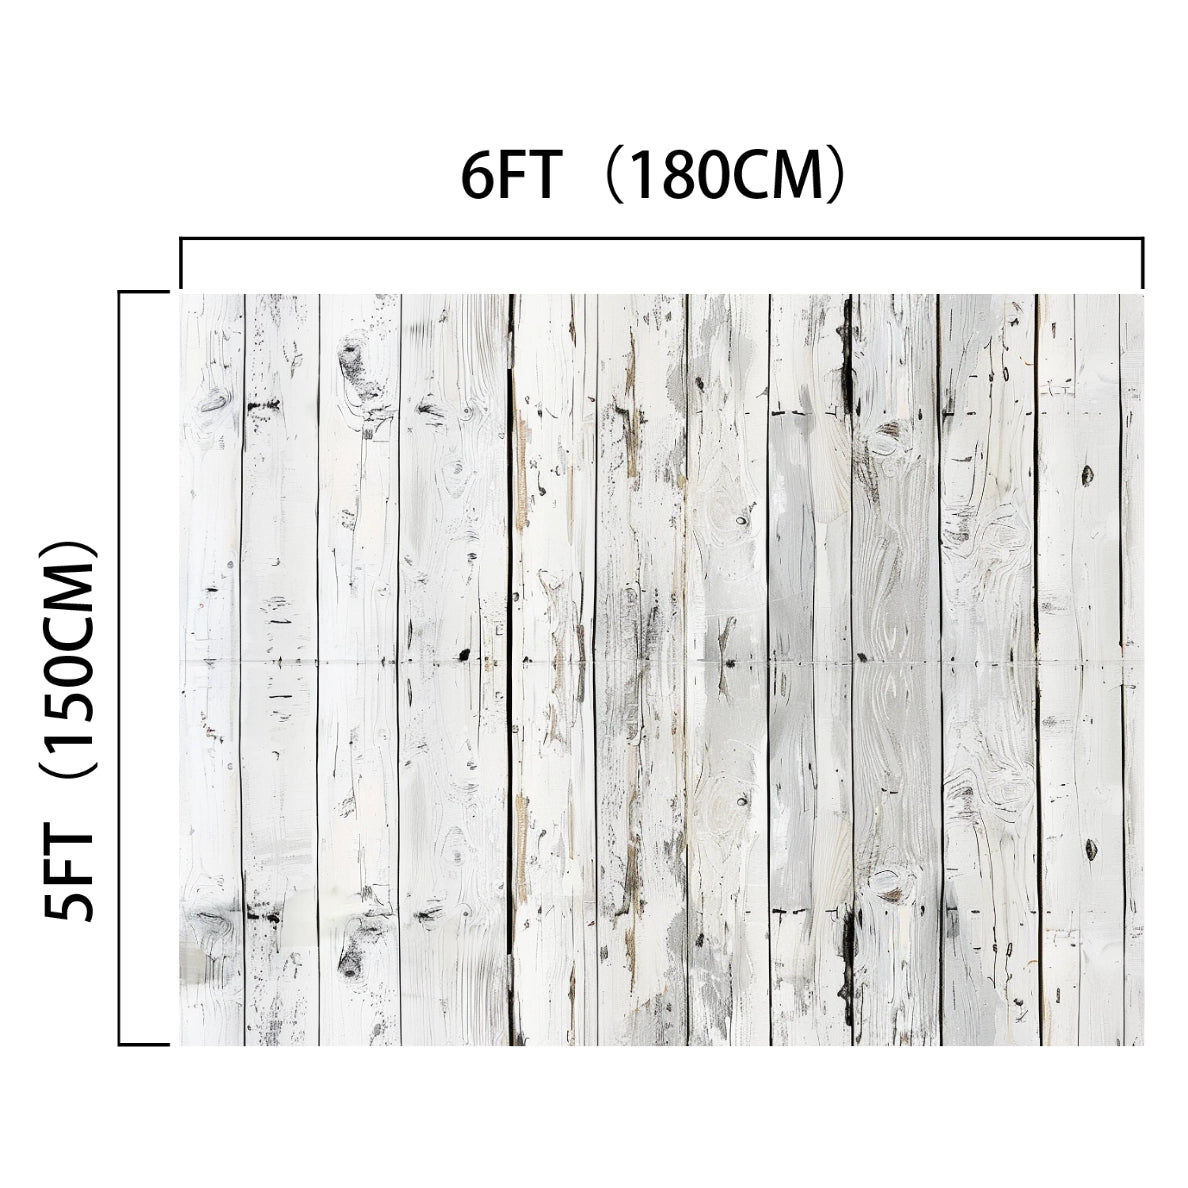 An ideasbackdrop Wood Backdrop Retro Rustic White Gray Wooden Floor Background for Photography Kids Photo Booth Video Shoot Studio Prop, measuring 6 feet (180 cm) in width and 5 feet (150 cm) in height, perfect for high-resolution printing.